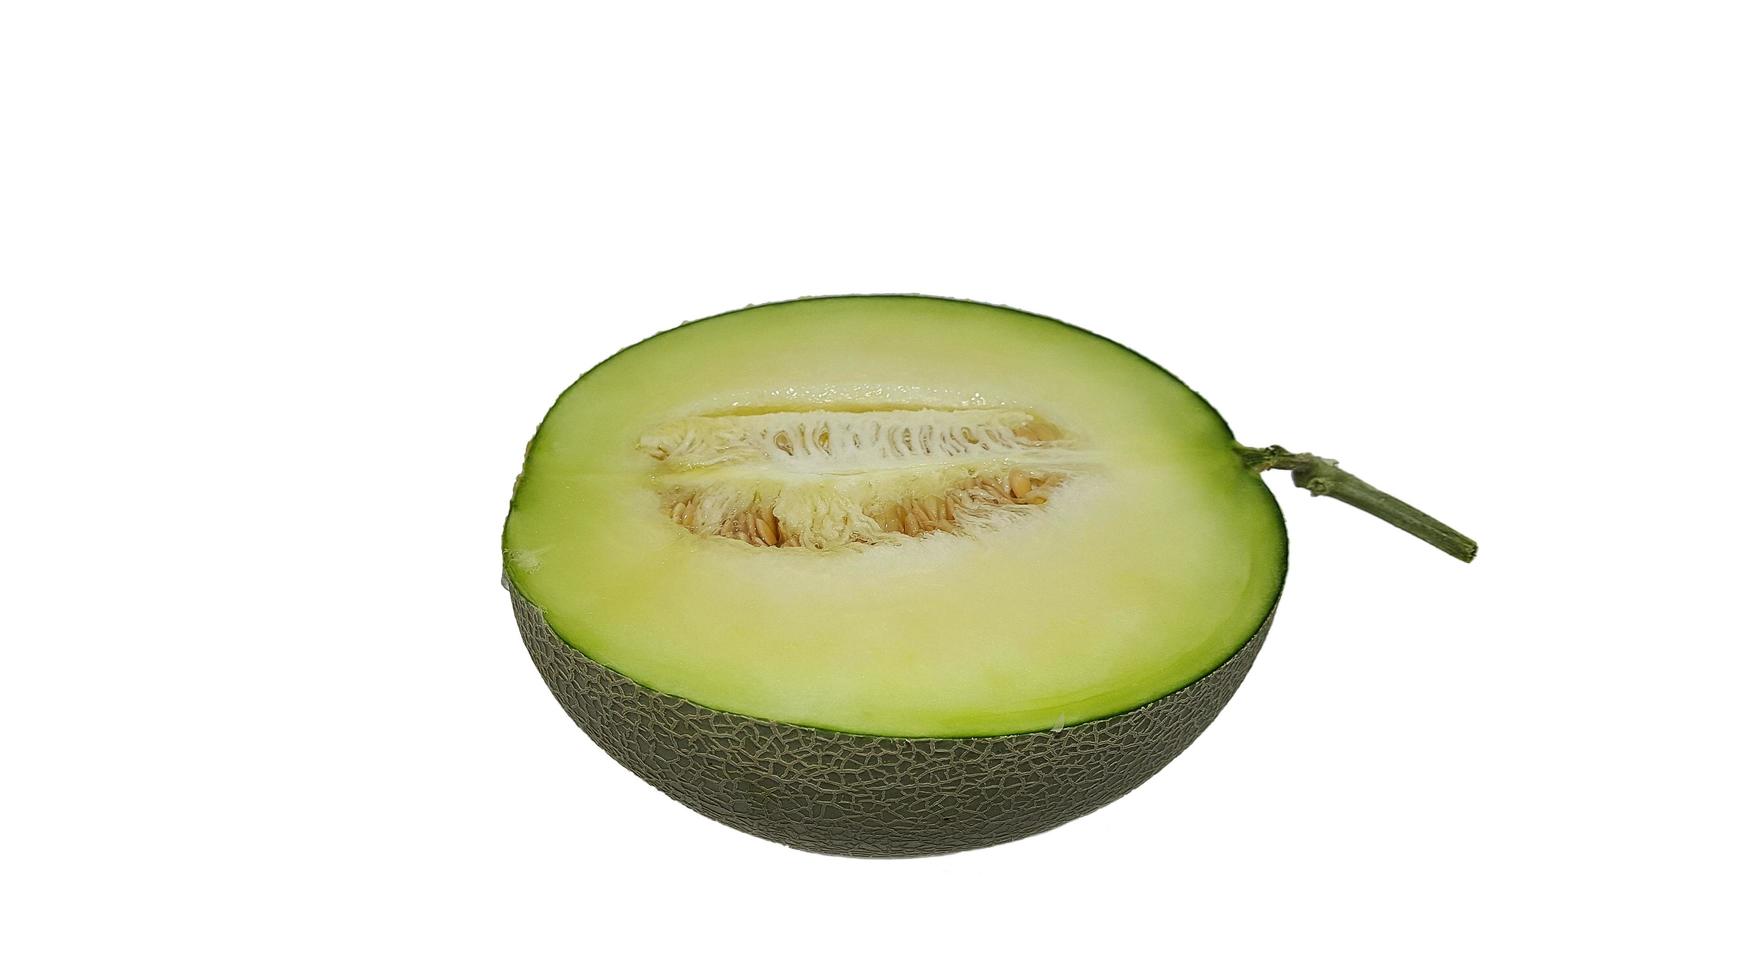 The green melon isolated on a white background. photo